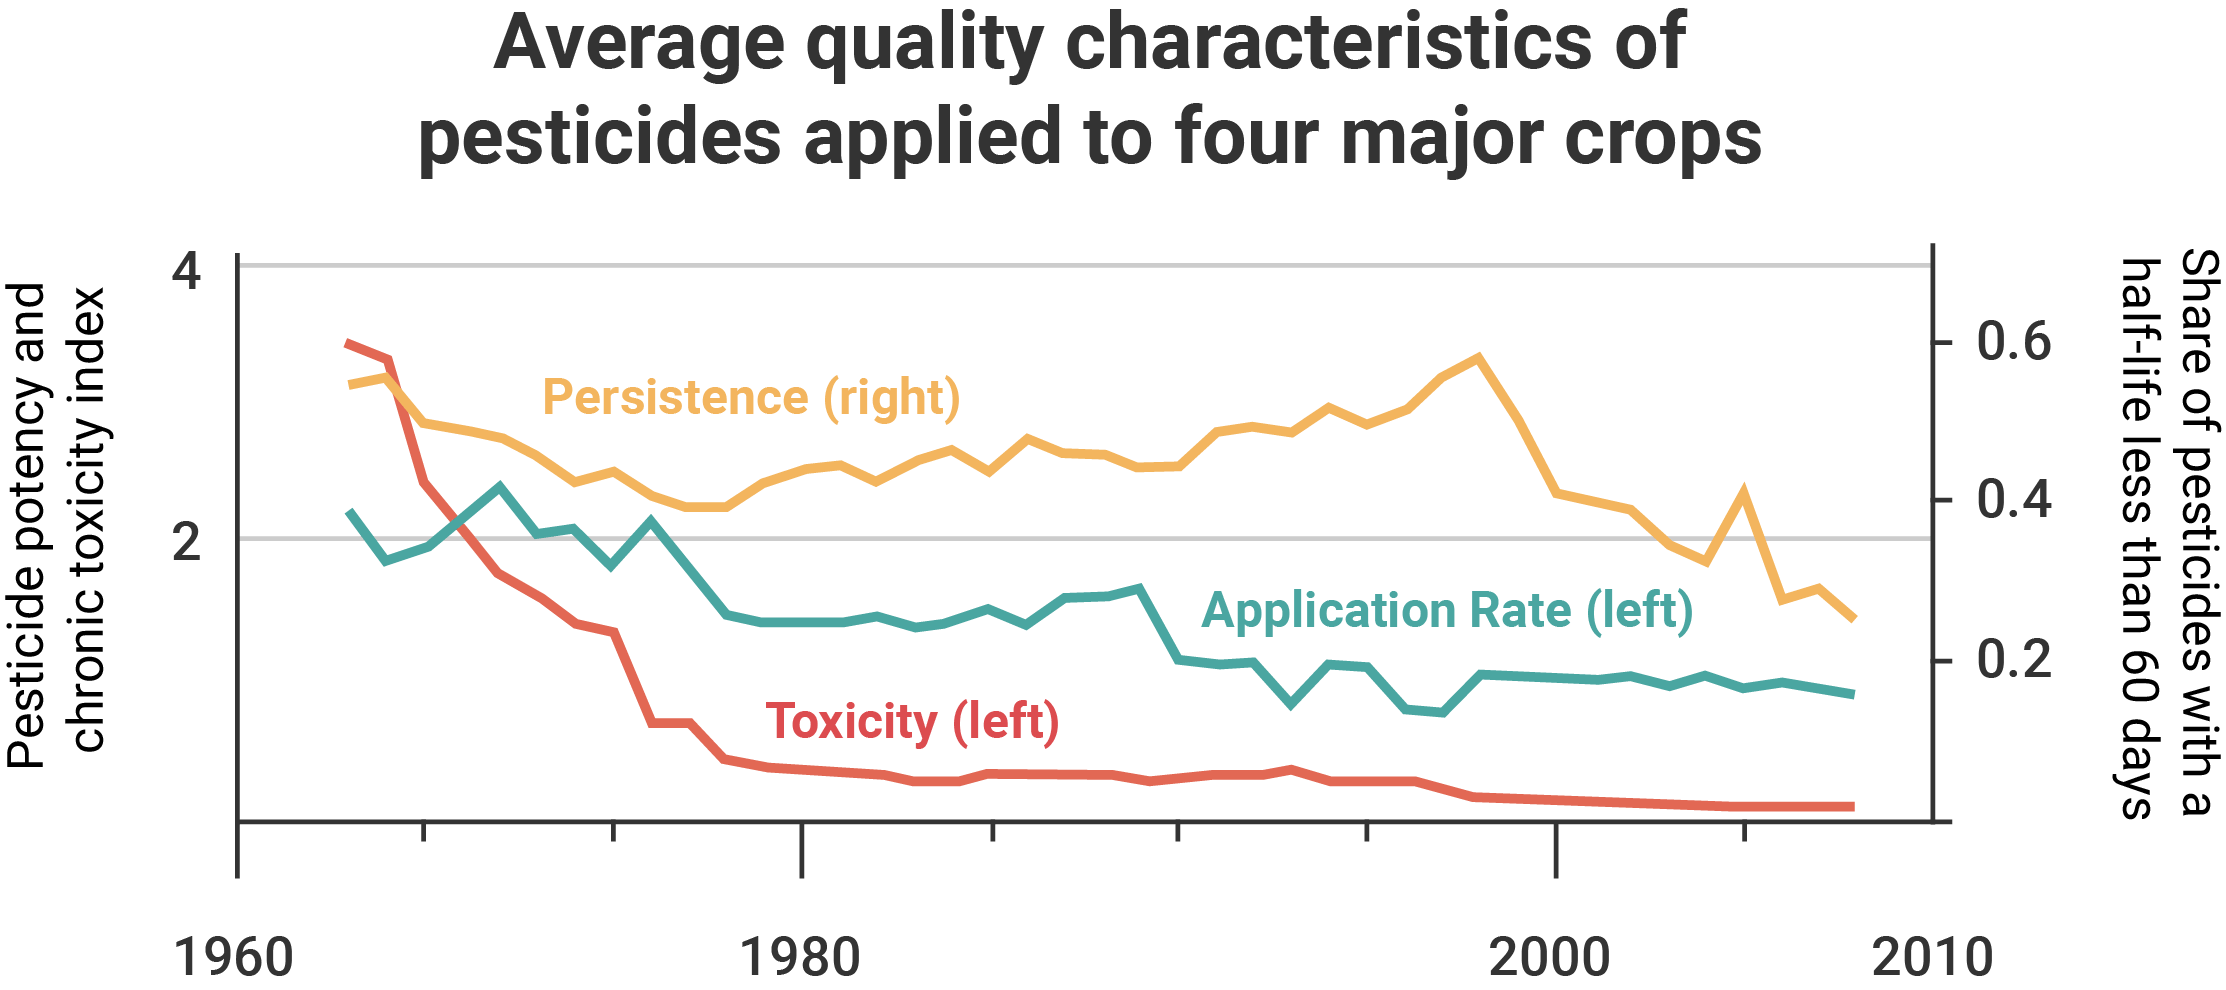 A graph showing quality characteristics (persistence, toxicity, and application rate) from 1960 to 2010.